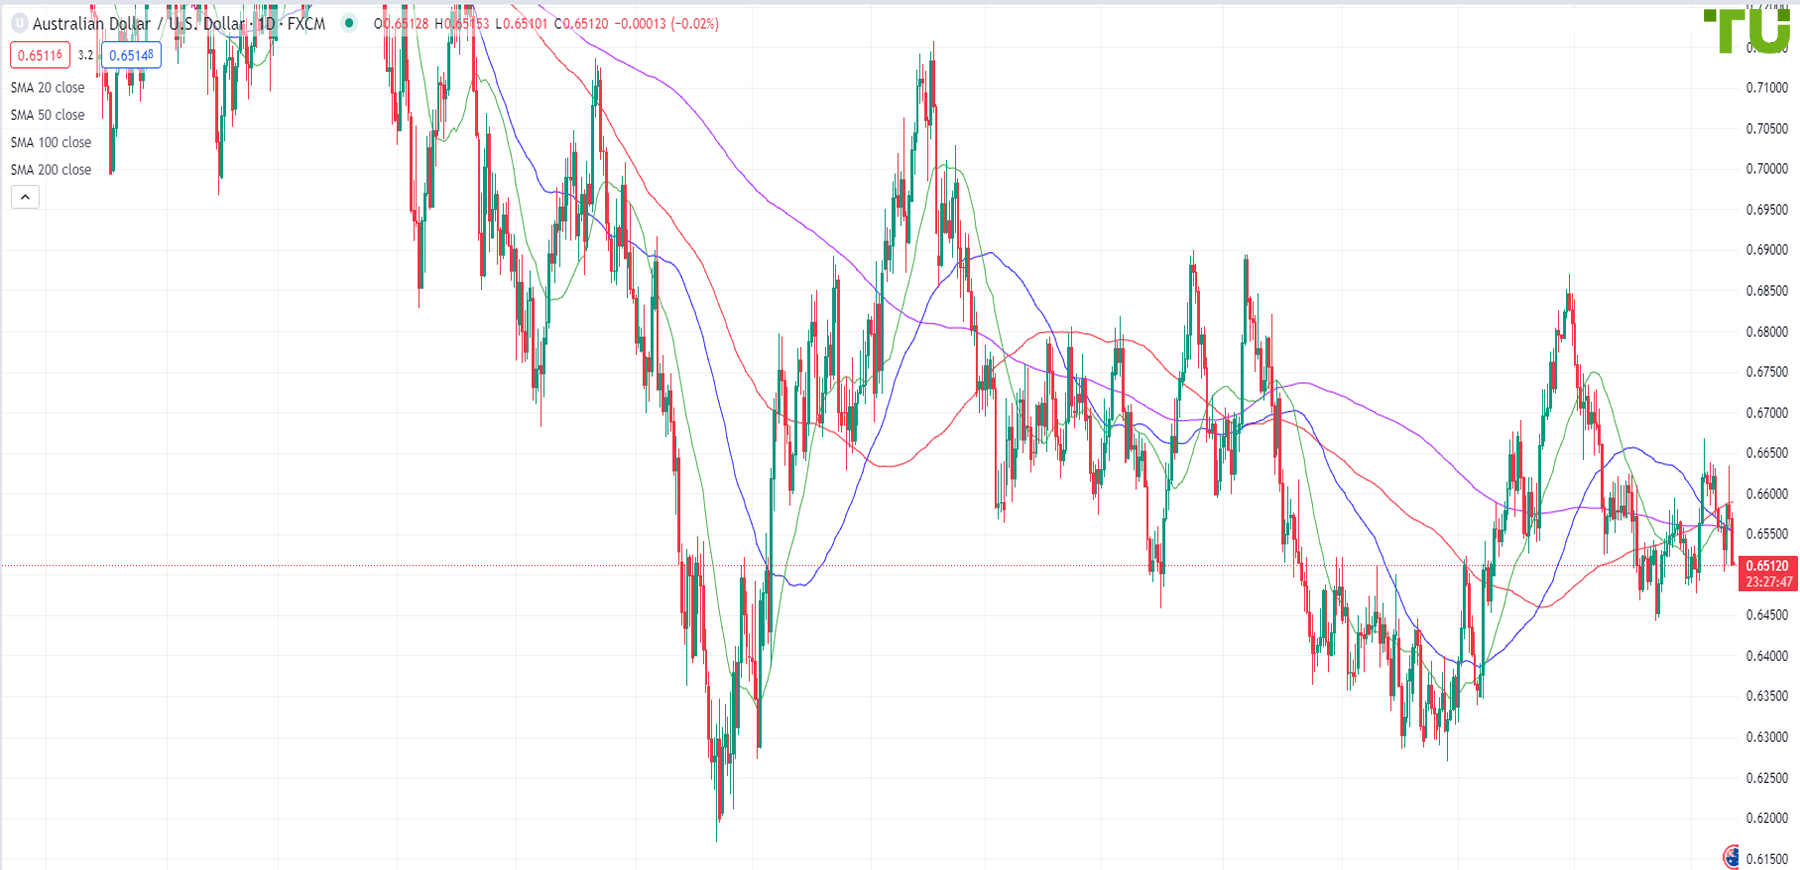 Aussie/dollar may break 0.6500 and continue to decline